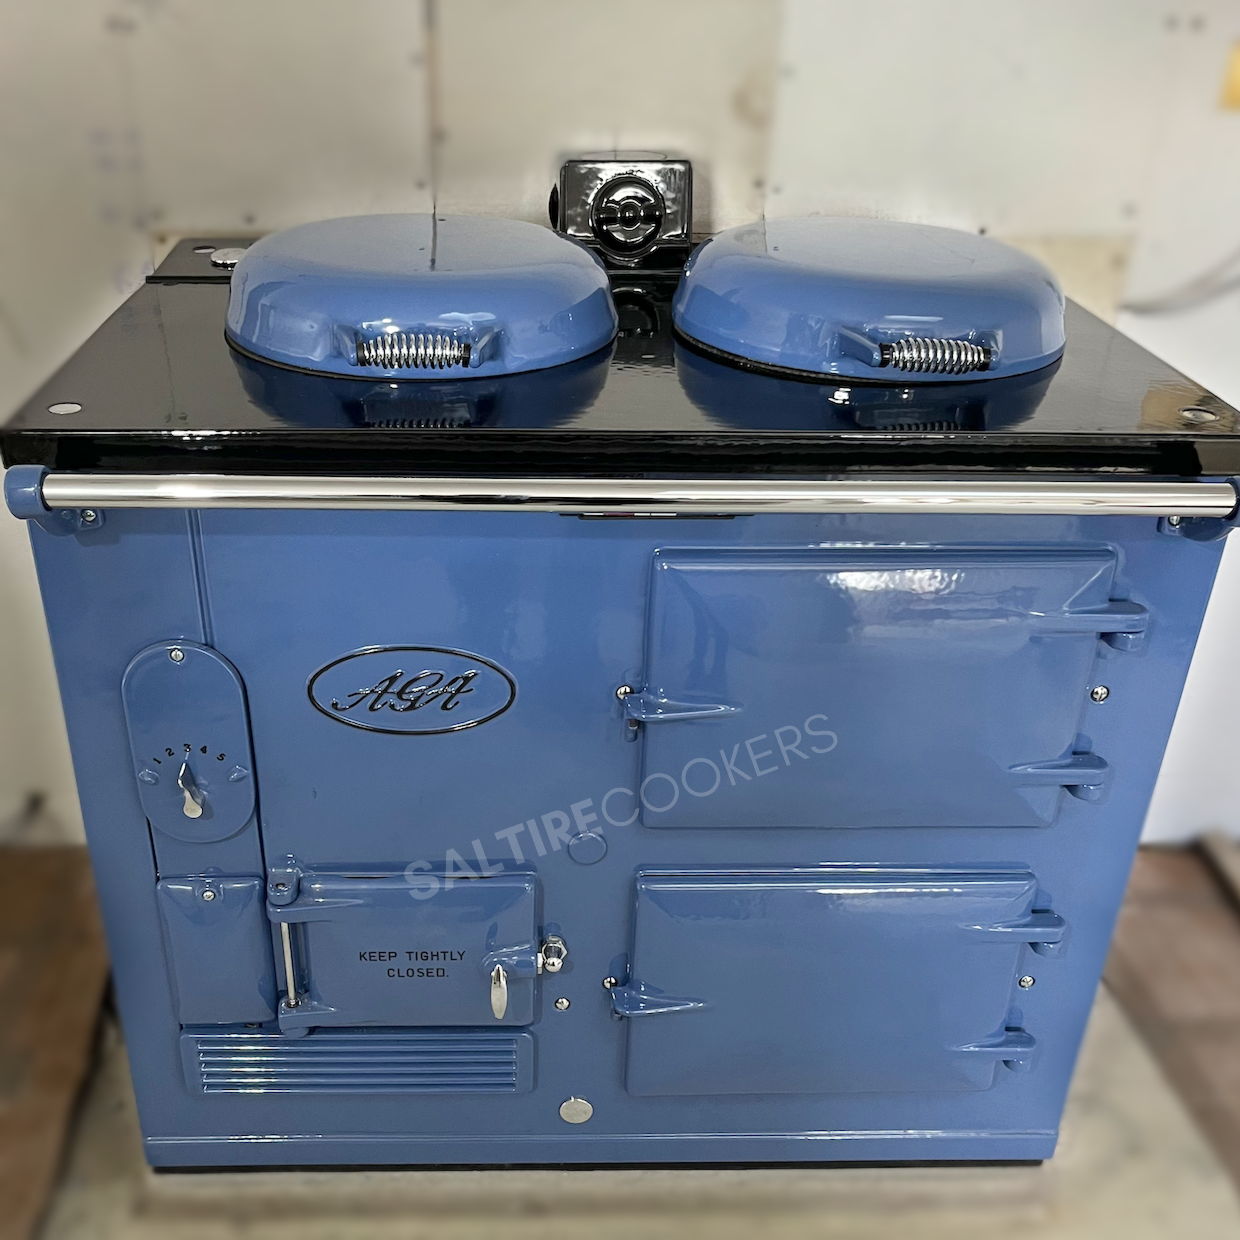 Reconditioned 2 Oven ElectricKit Aga Cooker (Wedgewood)